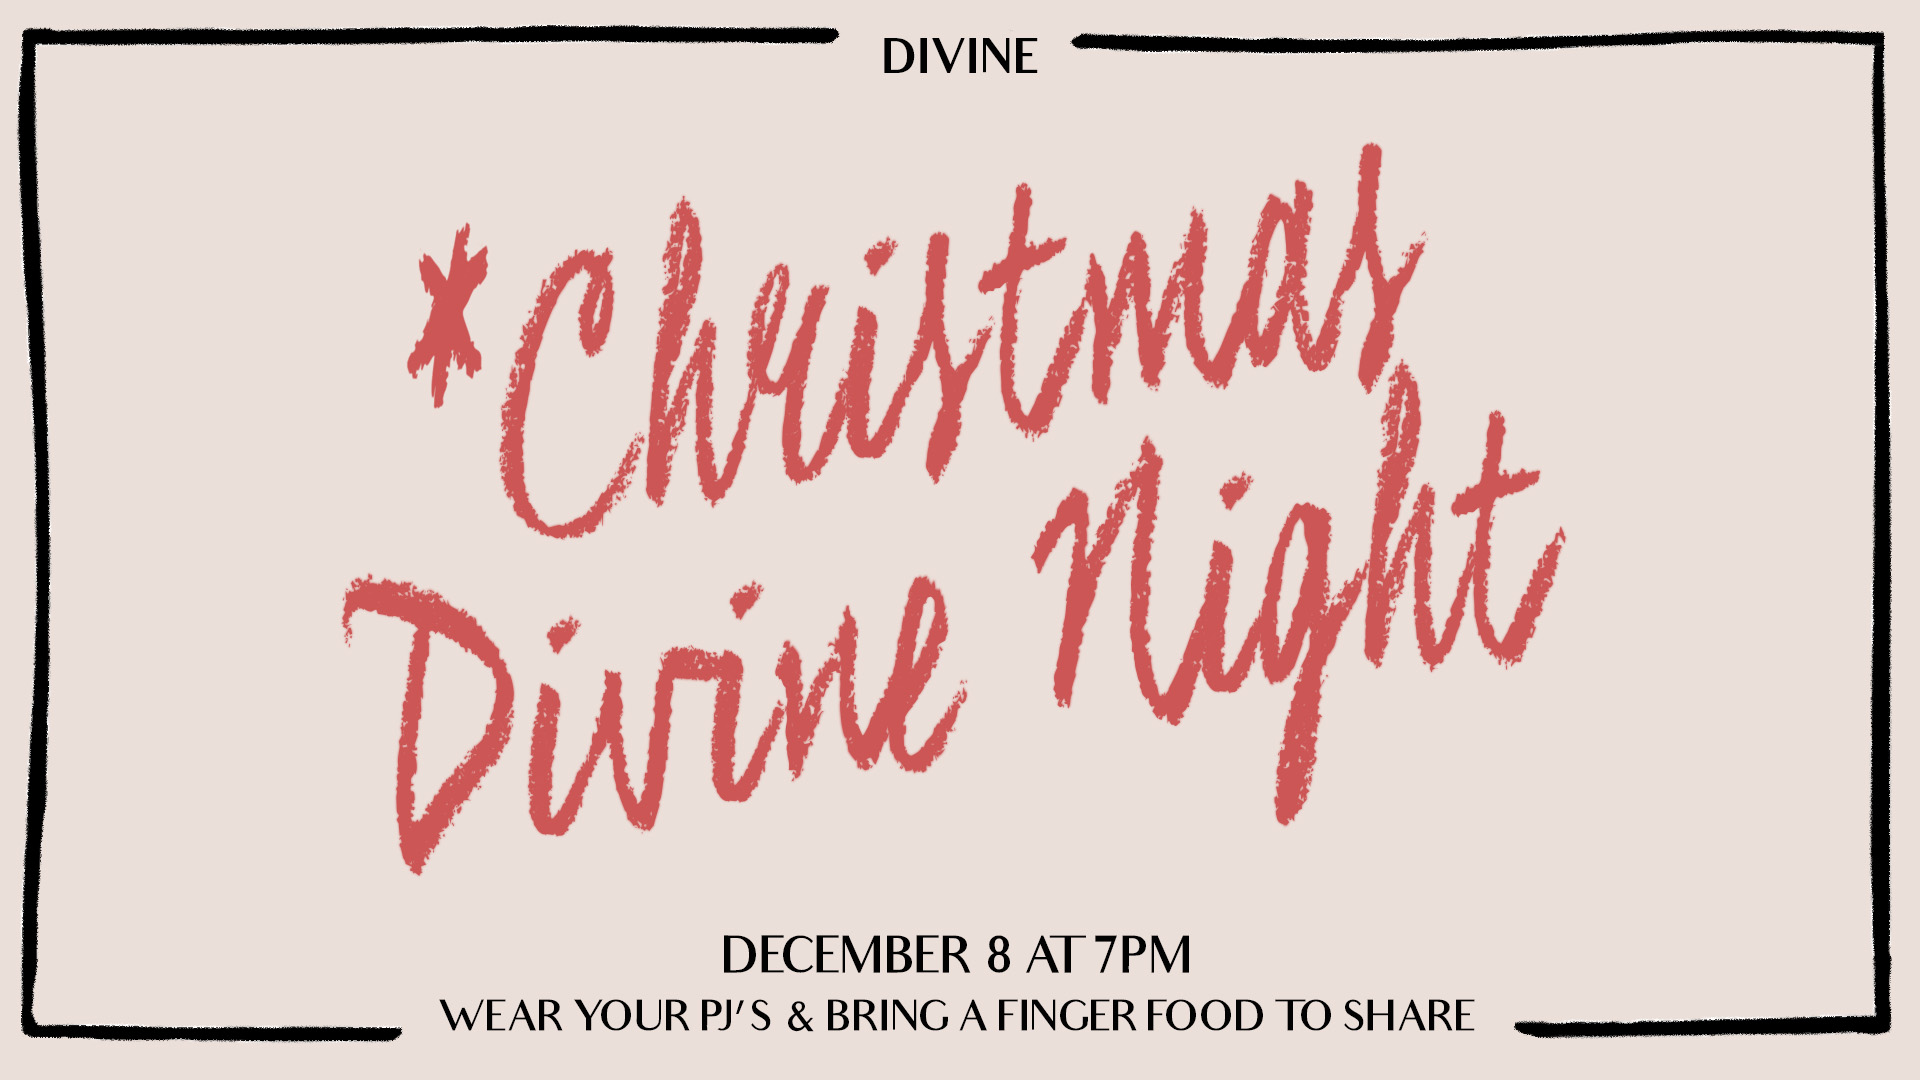 DIVINE: Christmas Night at the Braselton campus